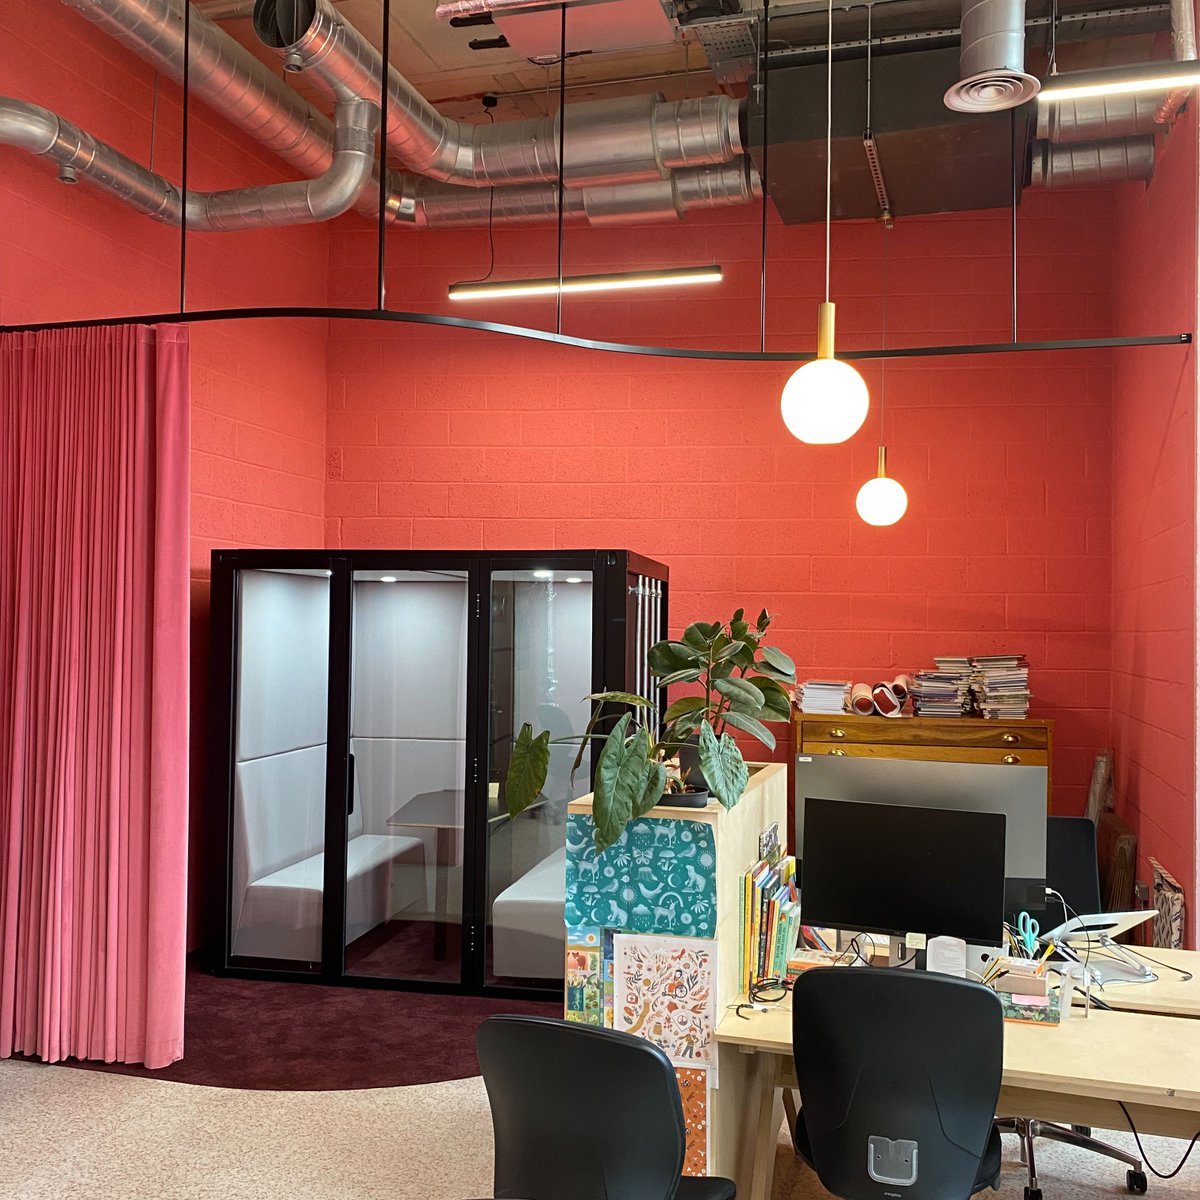 Our container box fitting perfectly into its new home at Magic Cat Publishing.
#themeetingpodco #meetingpod #officepod #officedesign #collaborativeworking #officefurniture #workplaceinteriors #commercialinteriors #madeinbritain